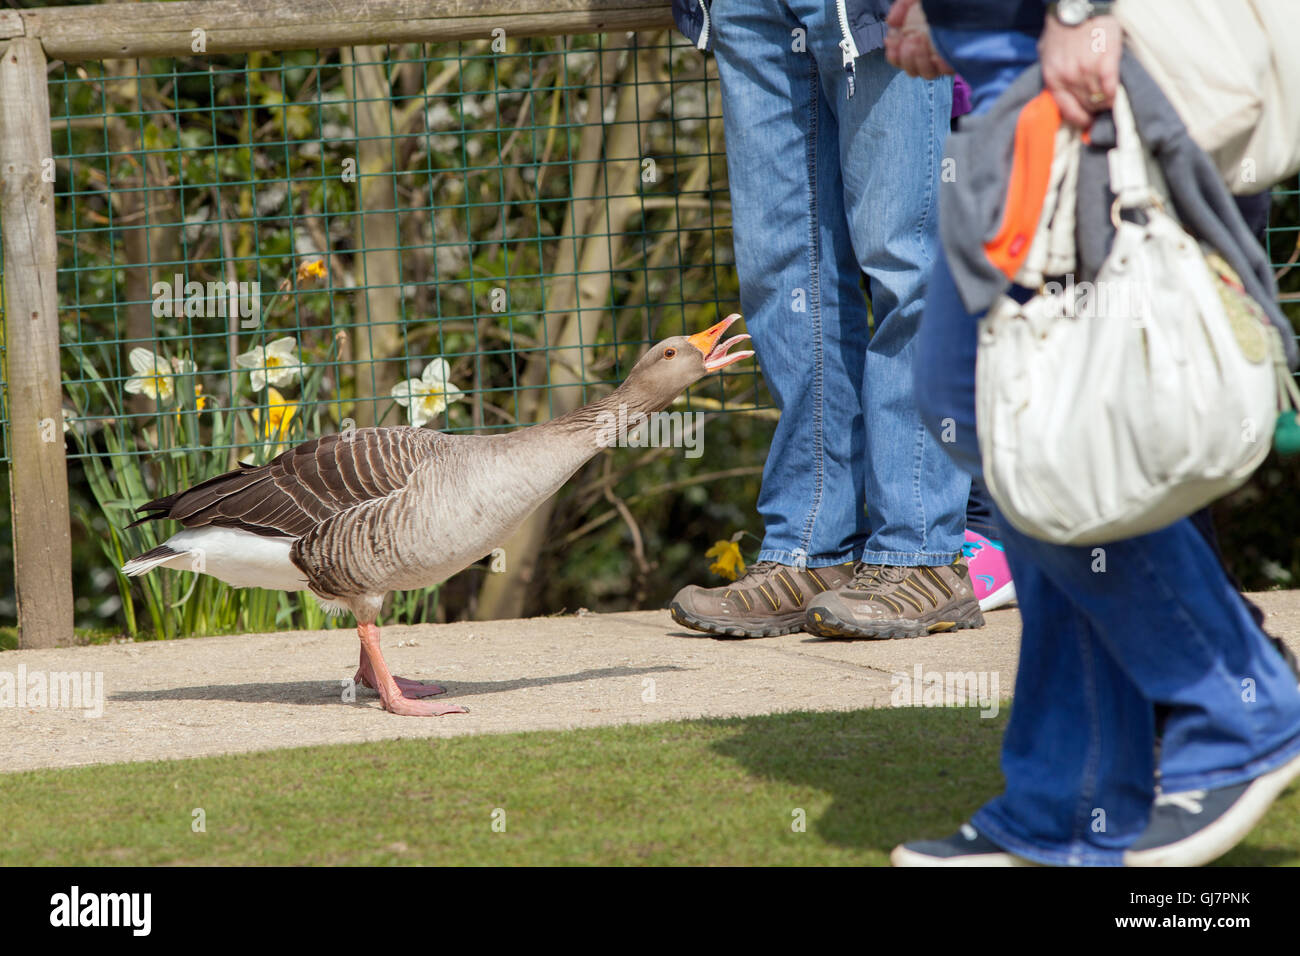 Greylag Goose (Anser anser). Gander accosting human visitors to Amazona Zoo, Cromer. People perceived as a threat. Stock Photo